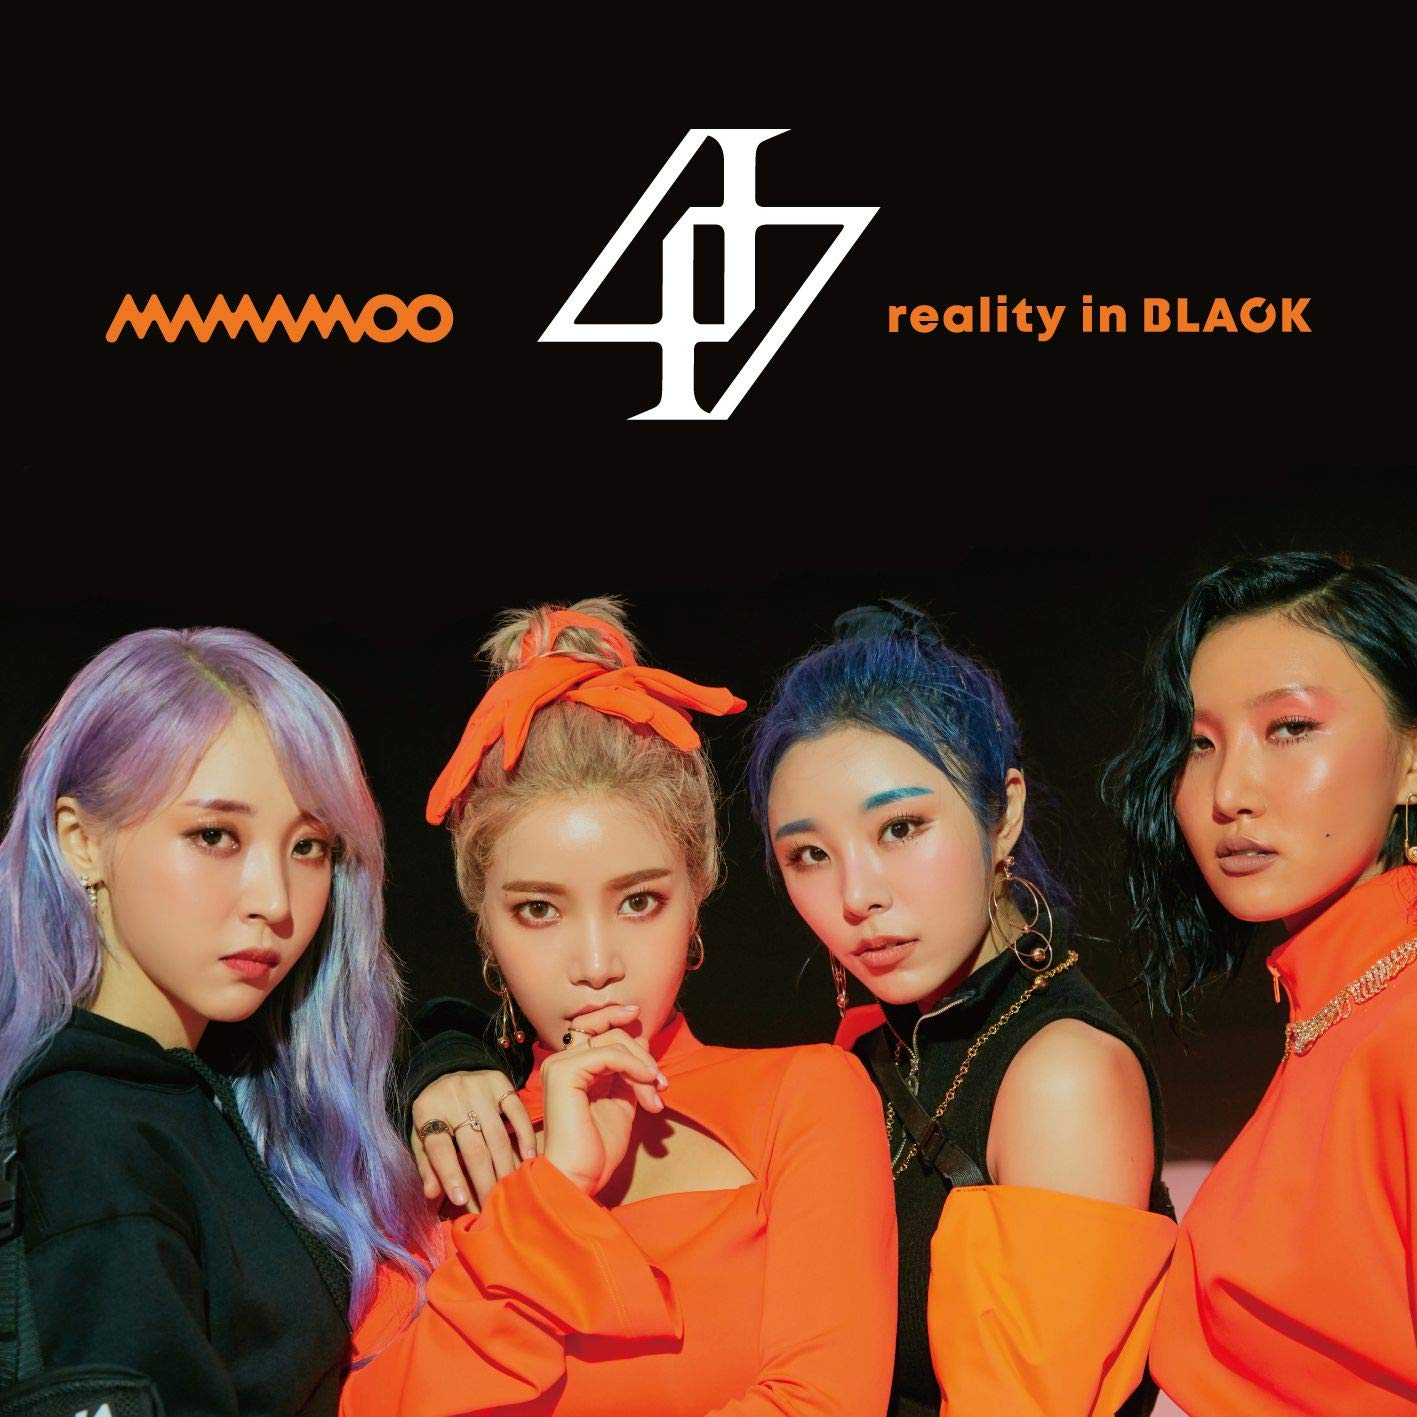 reality in BLACK -Japanese Edition- (Type A) [CD+DVD]